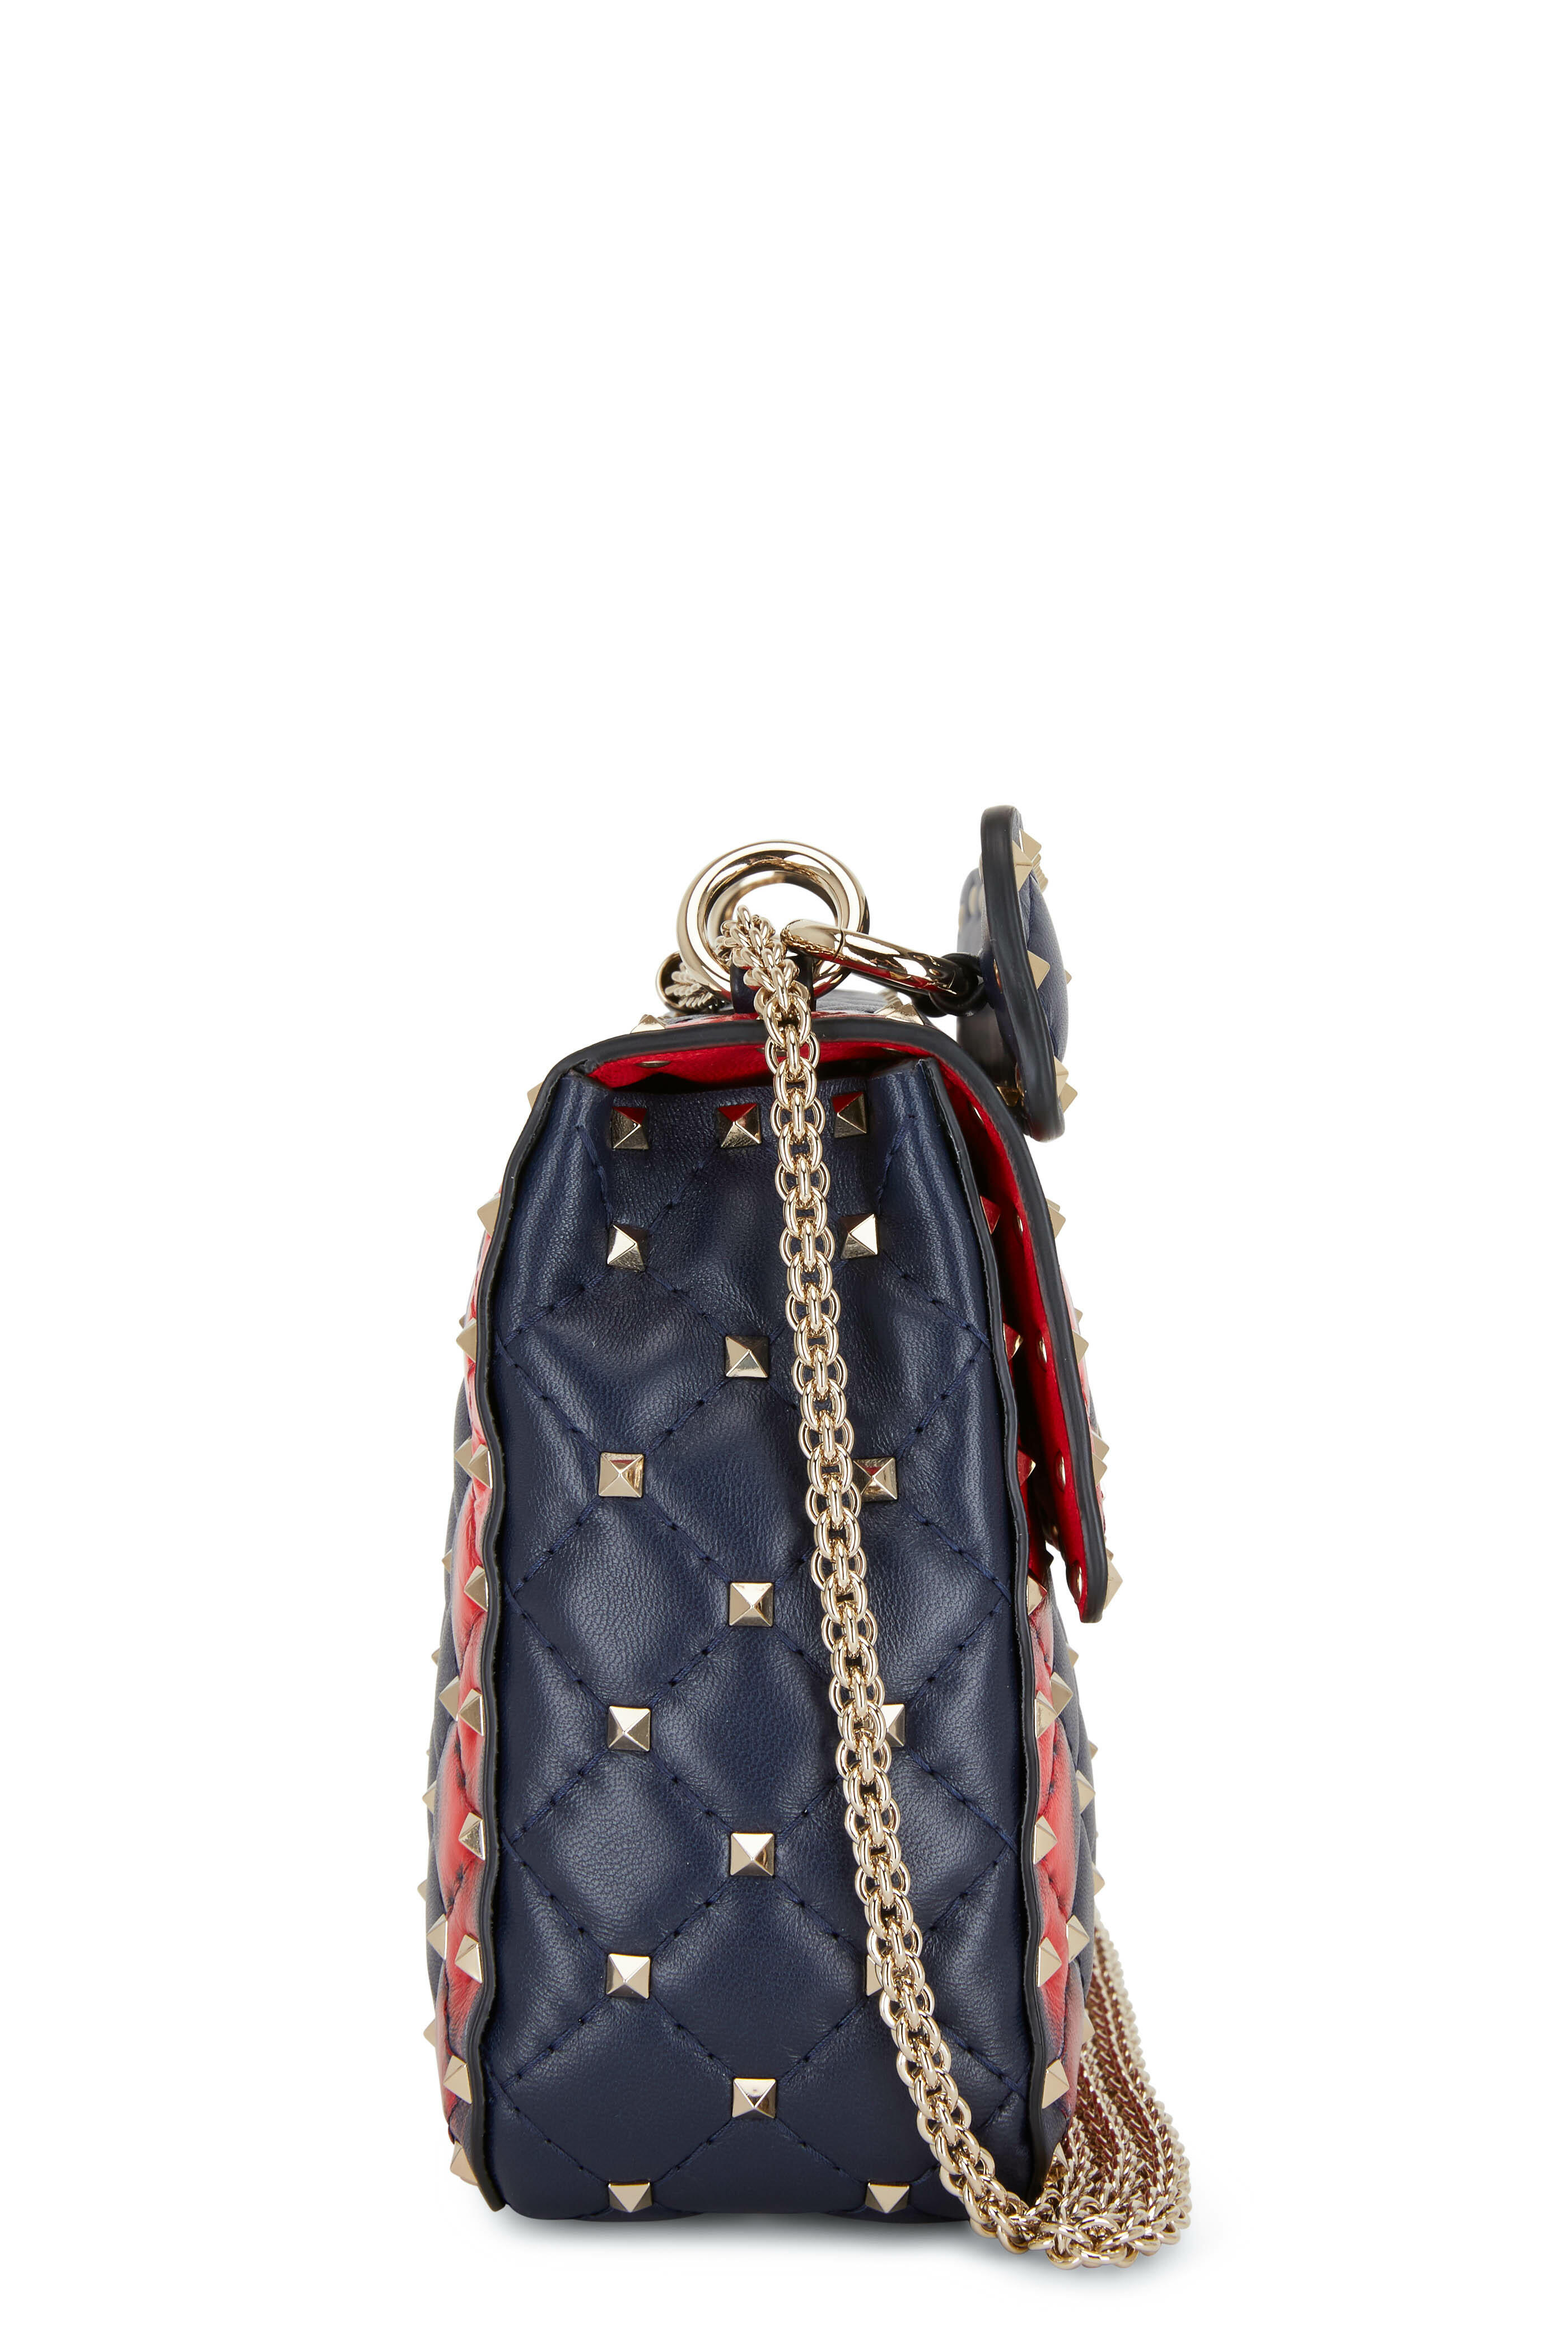 A brown and red heart bag by Louis Vuitton, white studded sneakers